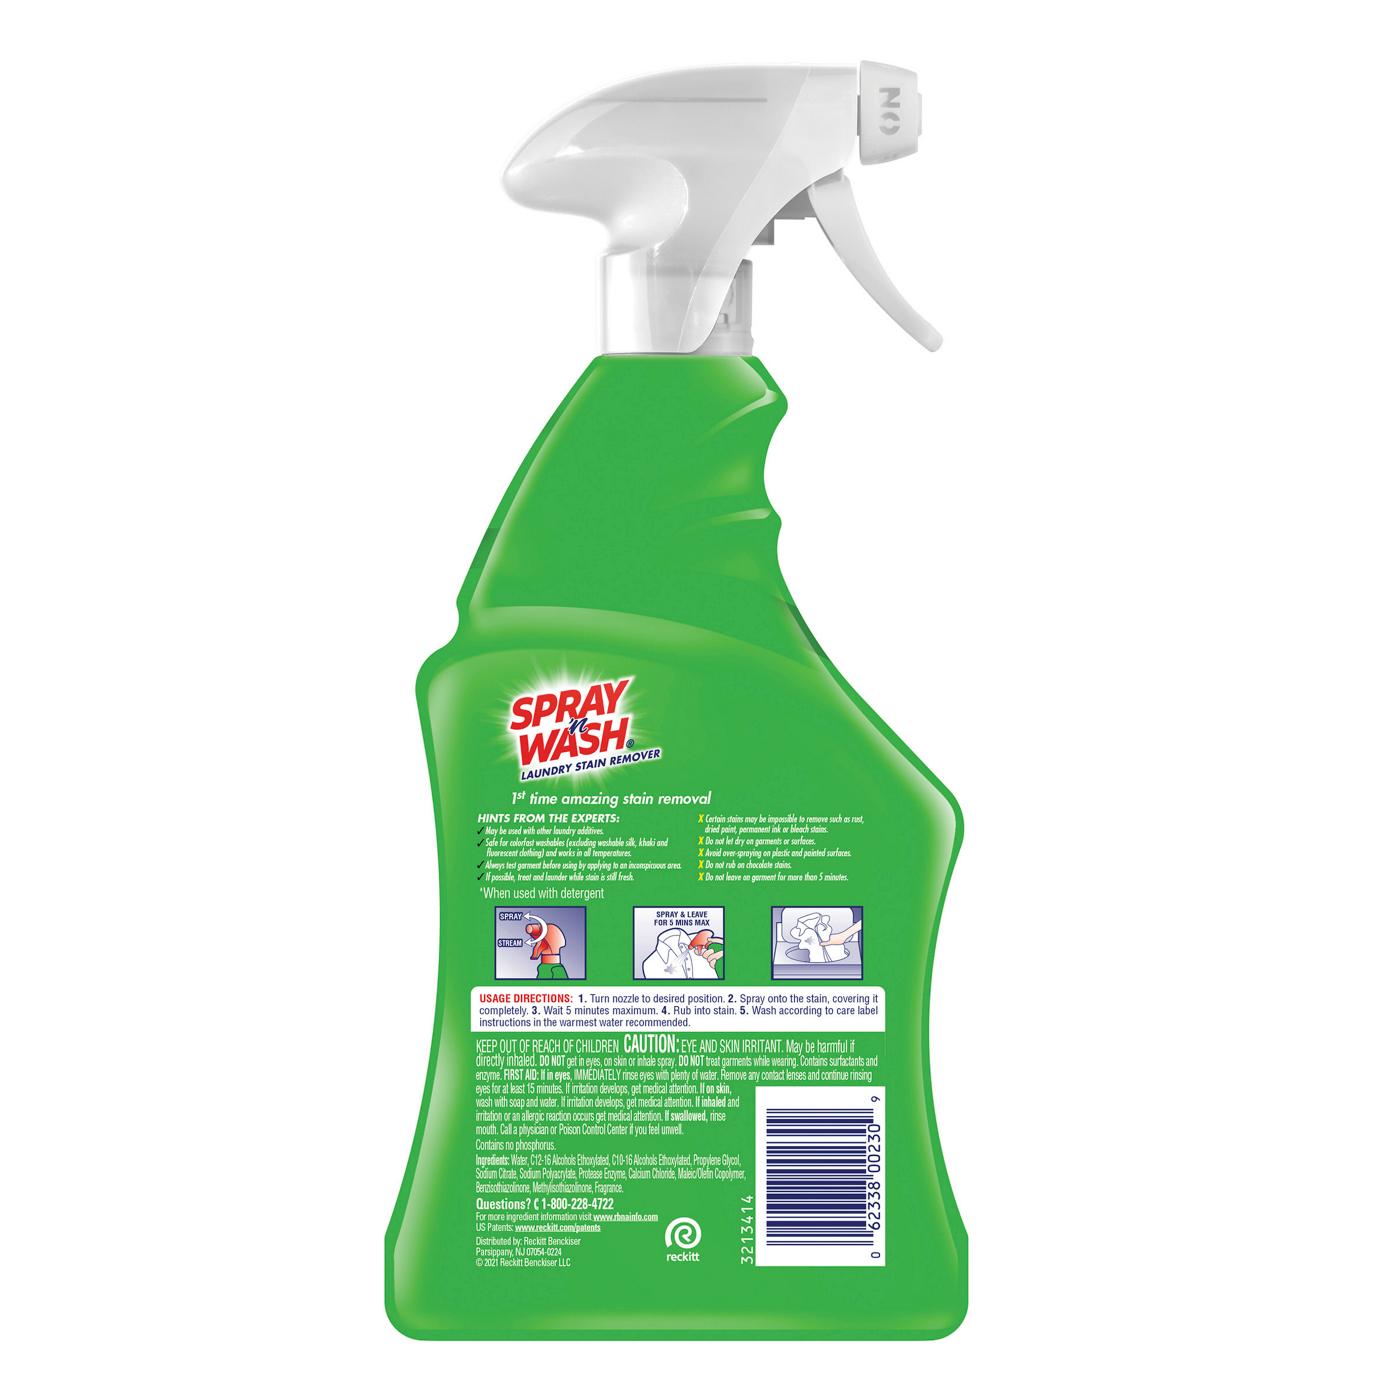 SPRAY 'n WASH 3-oz Laundry Stain Remover at